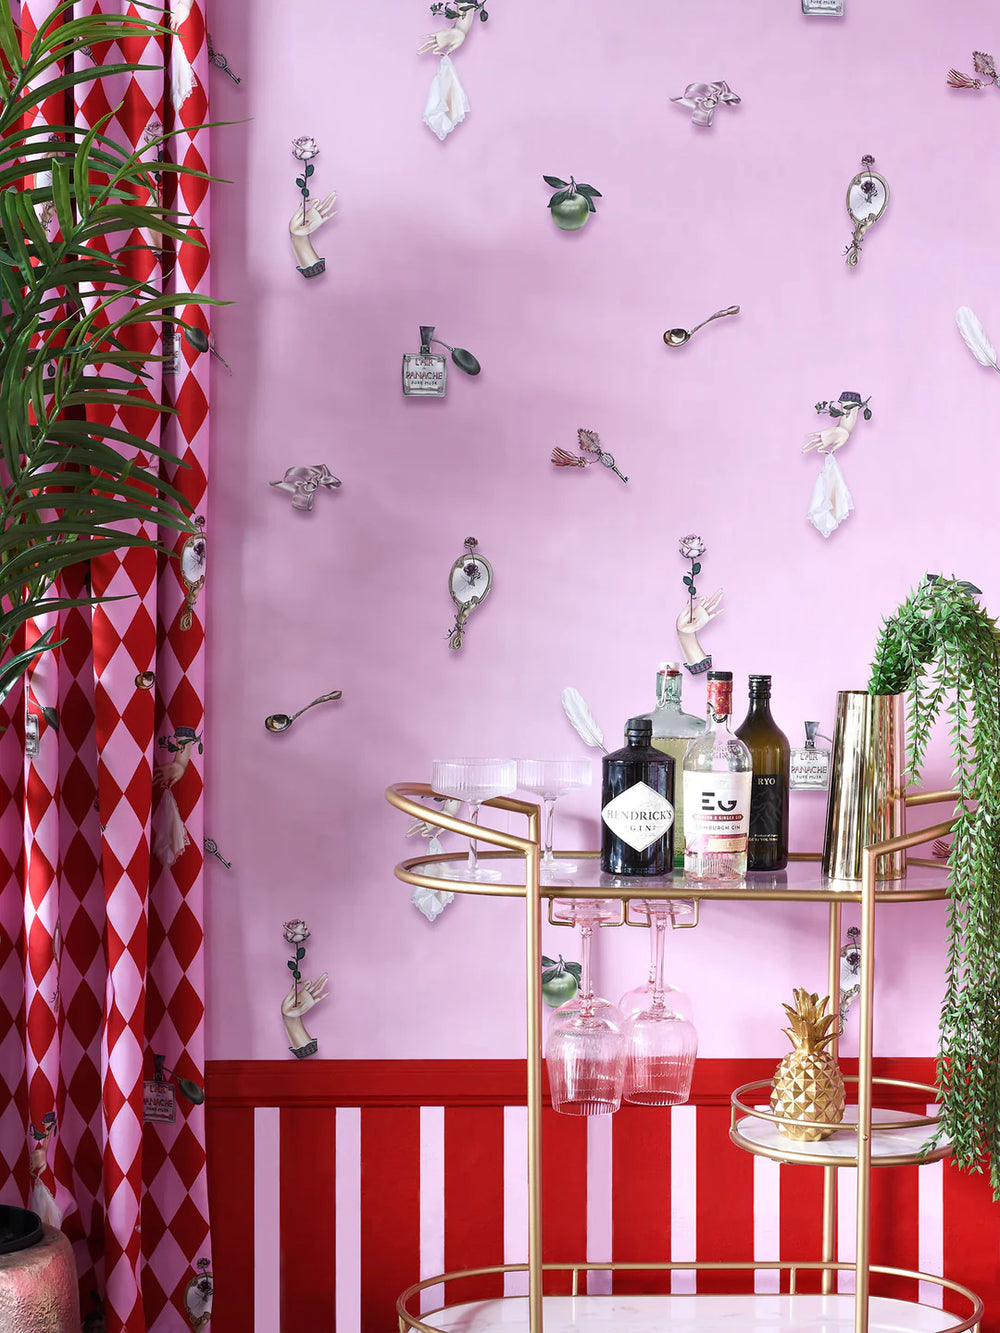 Witch-and-watchman-belle-epoque-wallpaper-red-dressingroom-old-glamour-Hollywood-style-boudoire-retro-fairytale-whimsical-wallpaper-bubblegum-pink-background